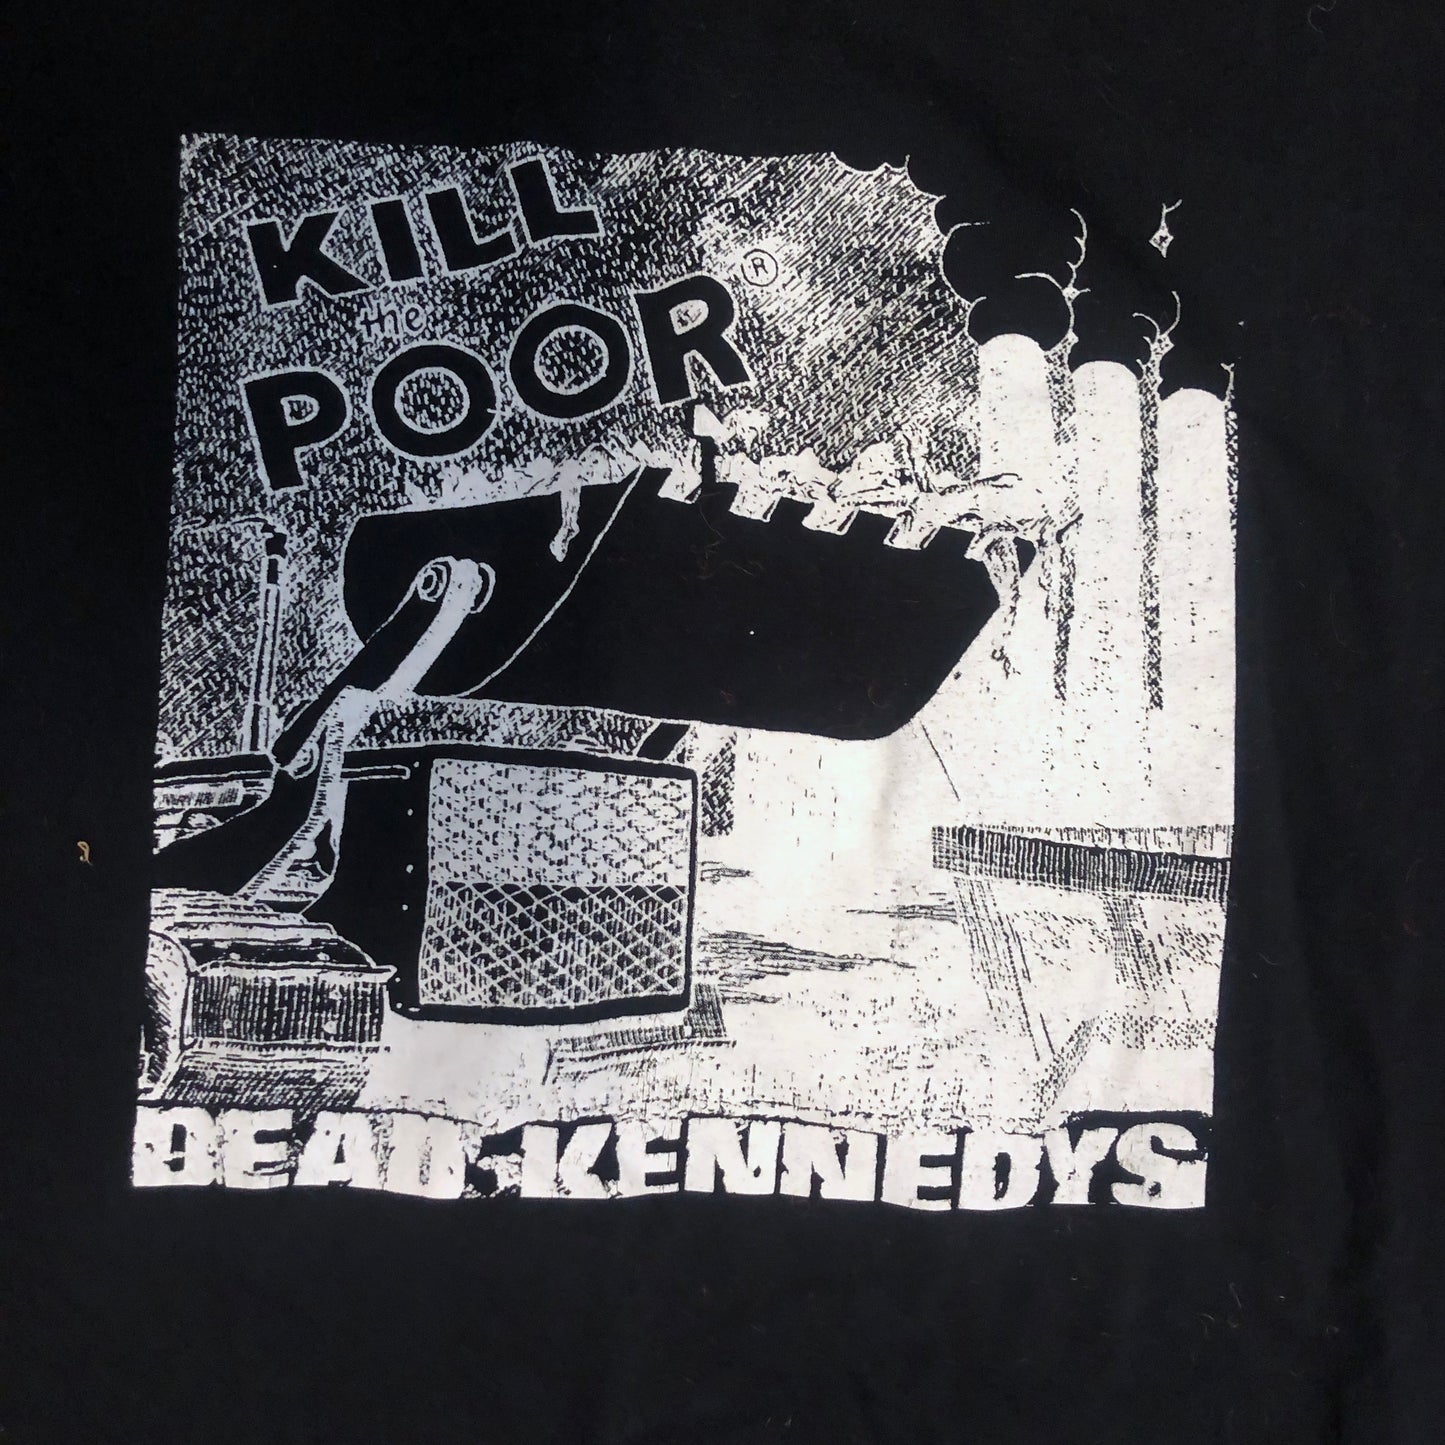 Winston Smith "Dead Kennedys Kill The Poor" Vintage Shirt